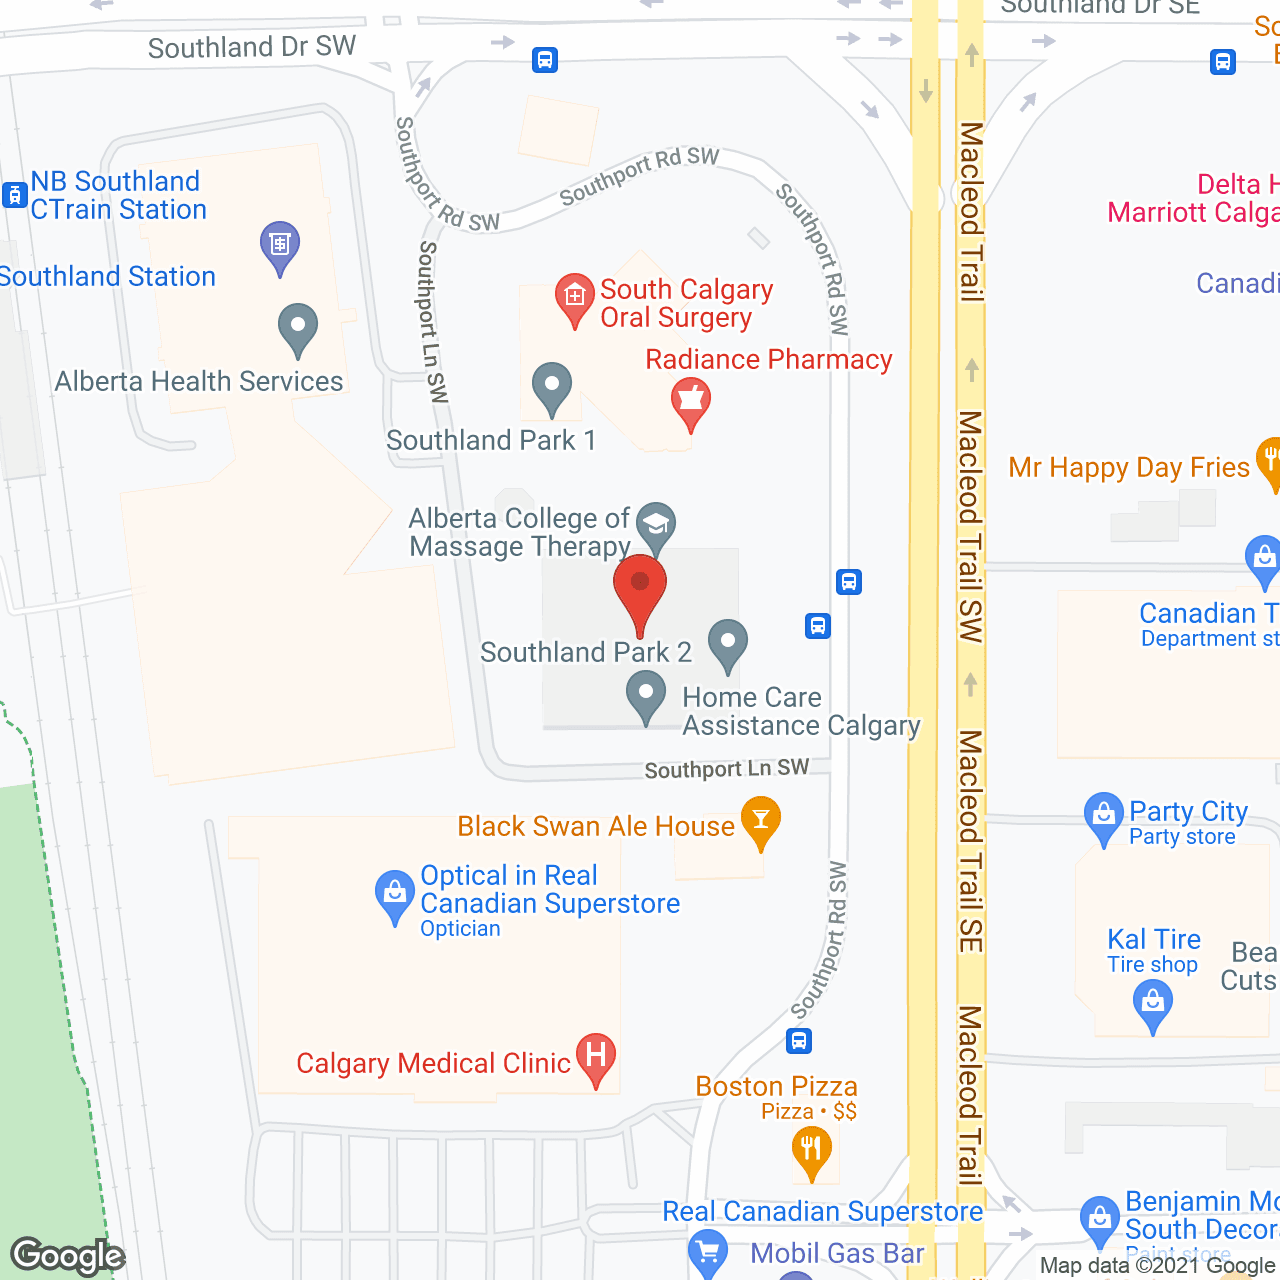 Home Care Assistance Calgary in google map